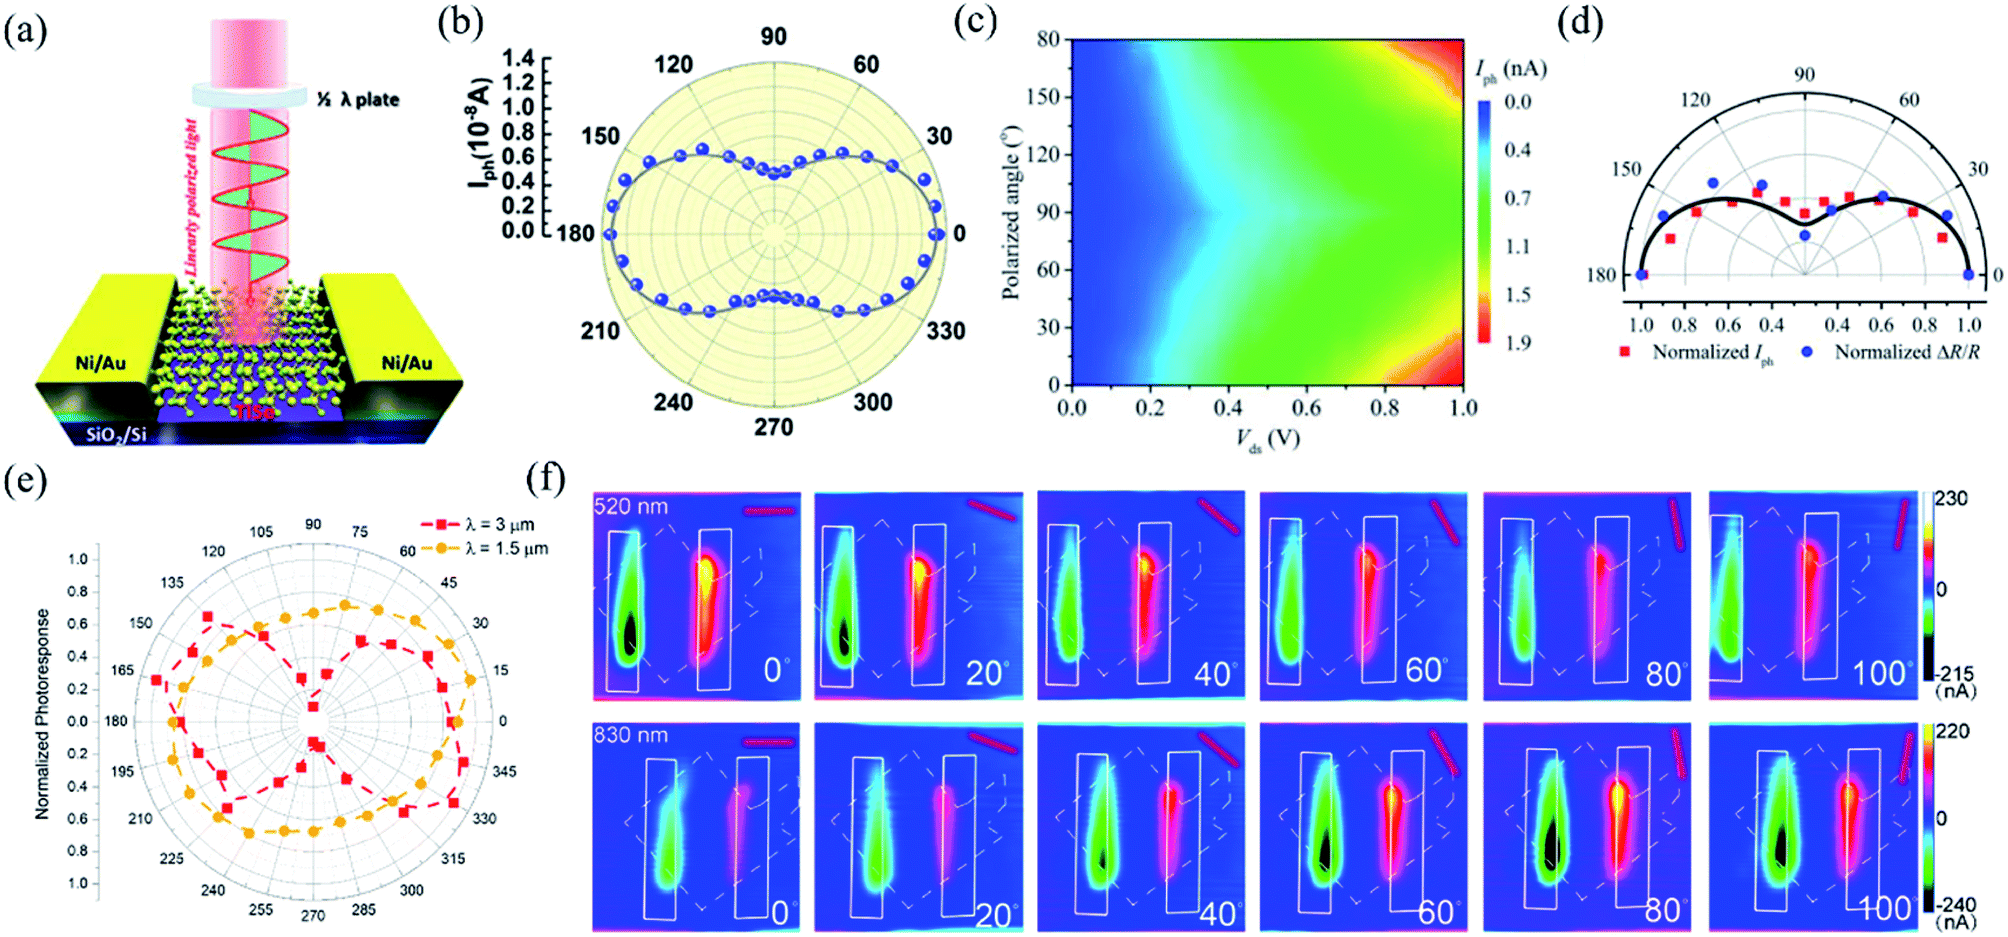 In Plane Anisotropic Electronics Based On Low Symmetry 2d Materials Progress And Prospects Nanoscale Advances Rsc Publishing